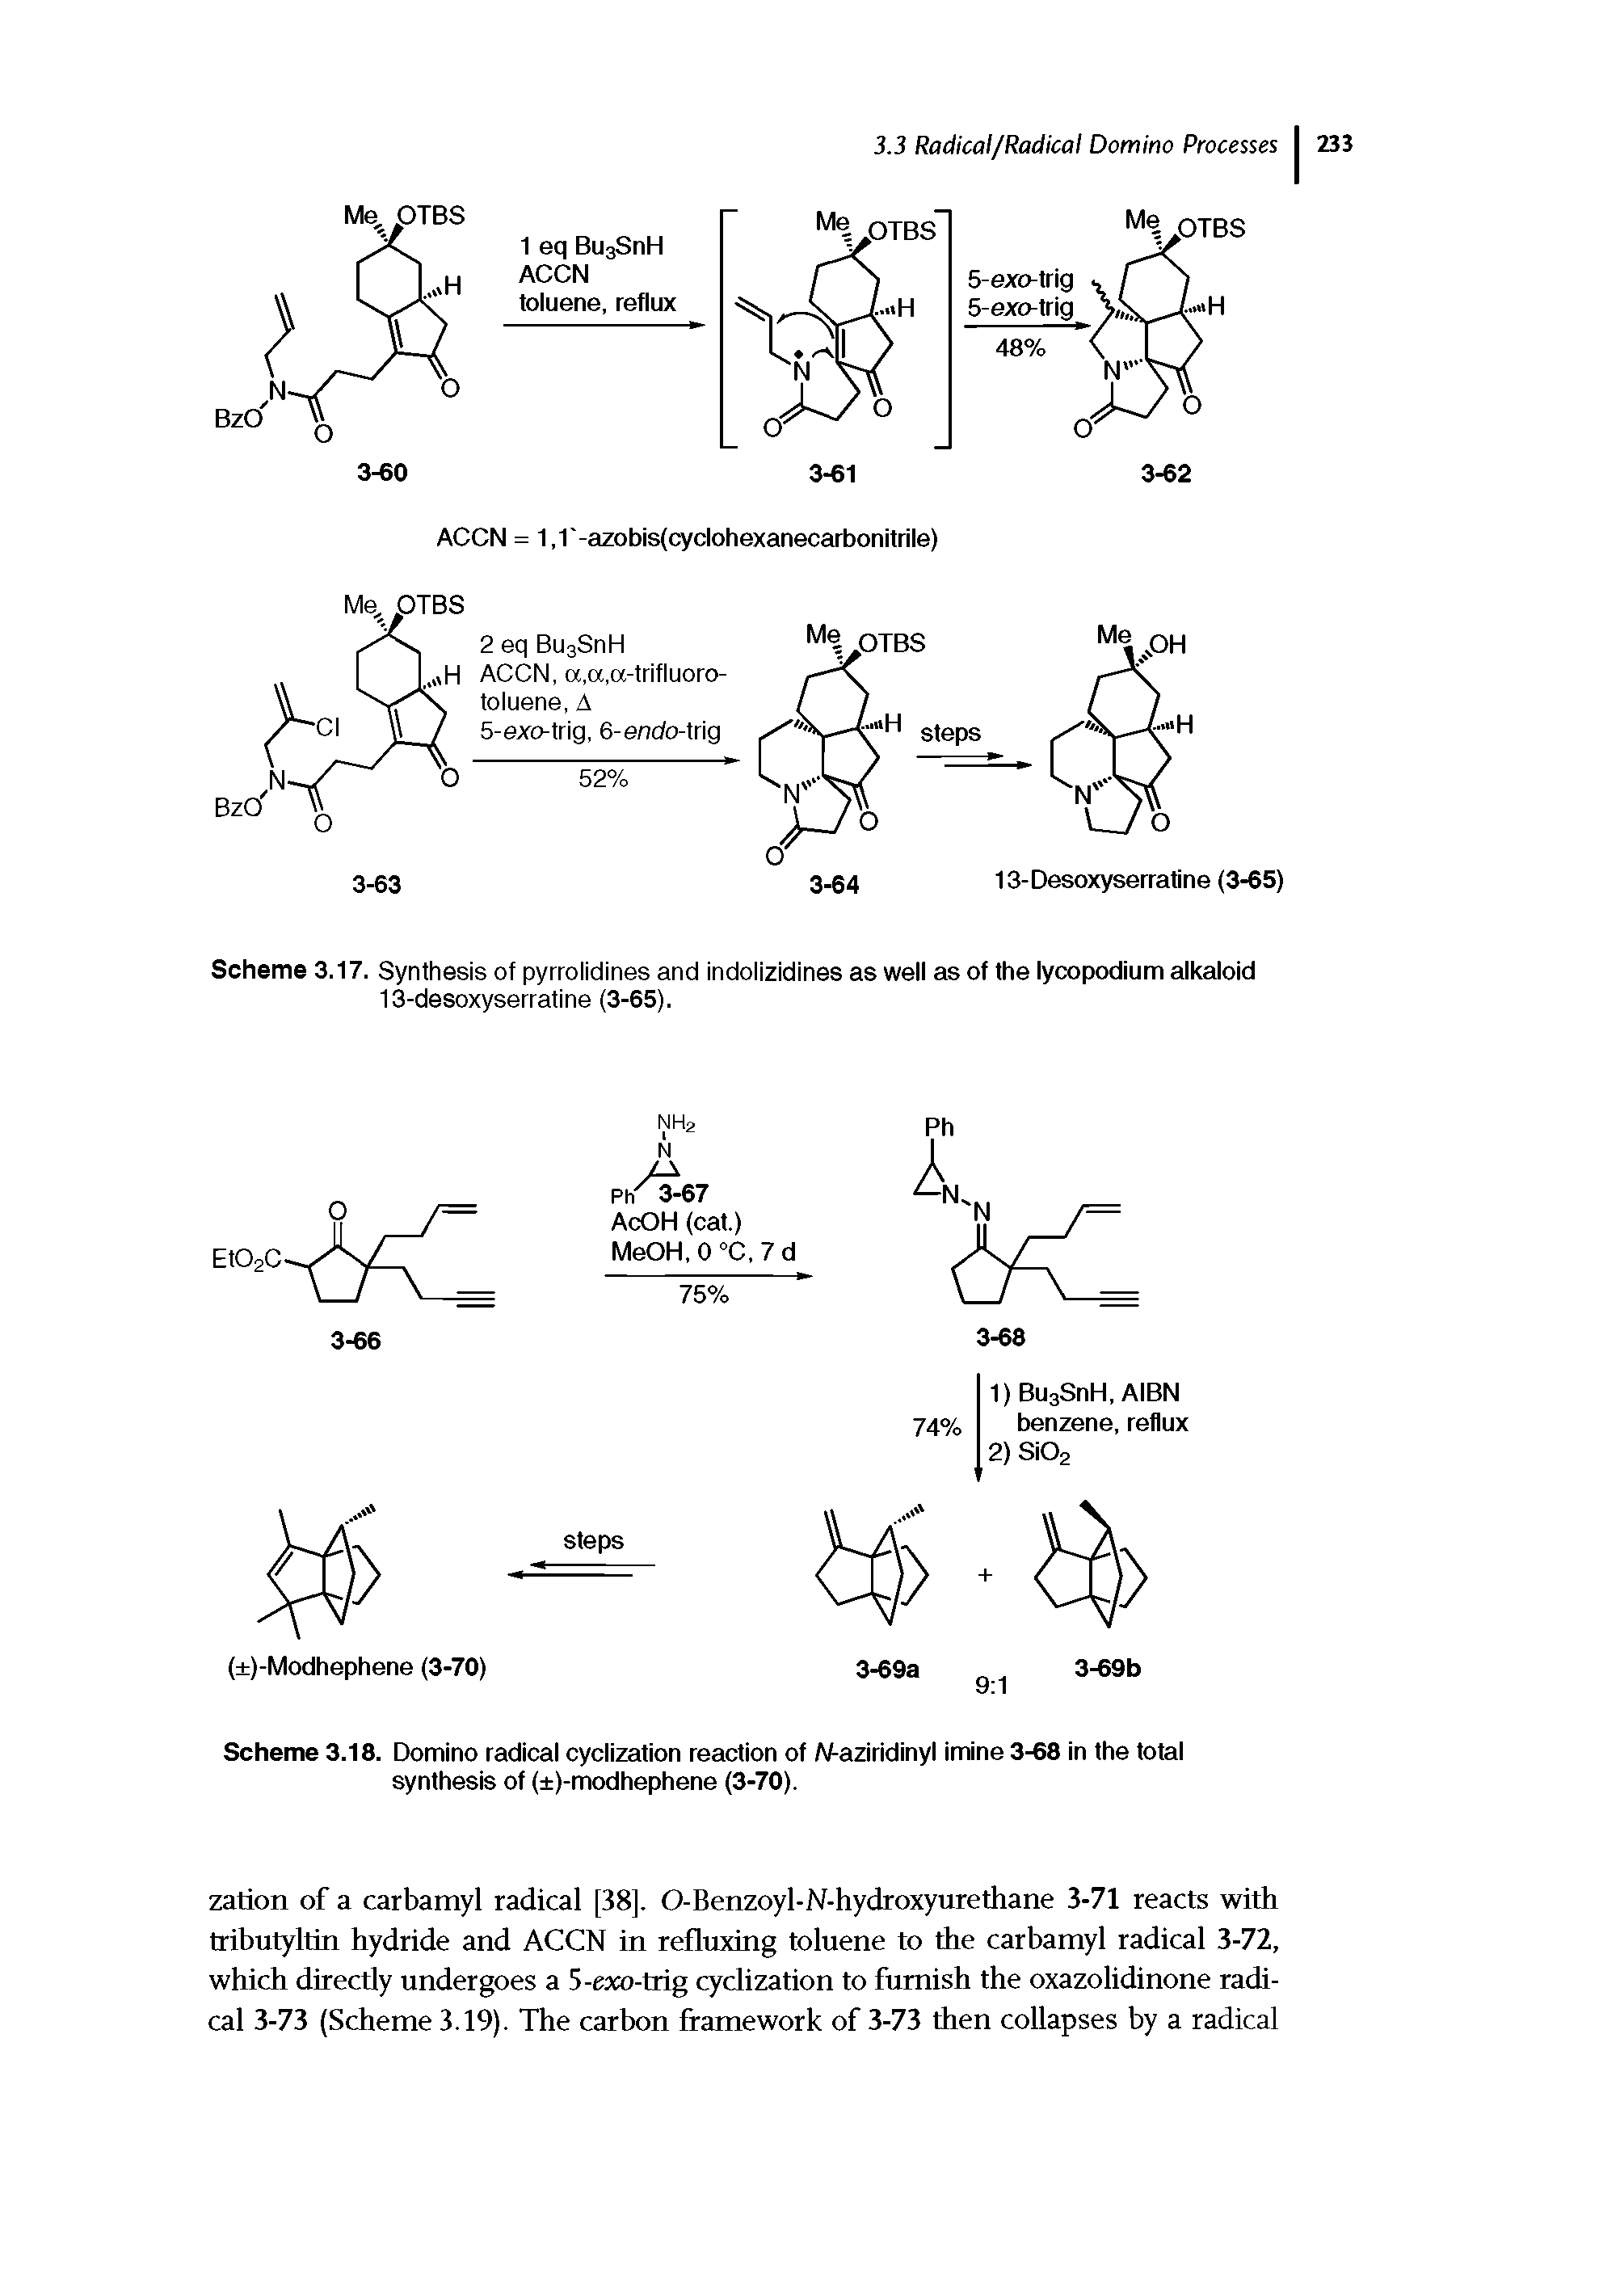 Scheme 3.17. Synthesis of pyrrolidines and indolizidines as well as of the lycopodium alkaloid 13-desoxyserratine (3-65).